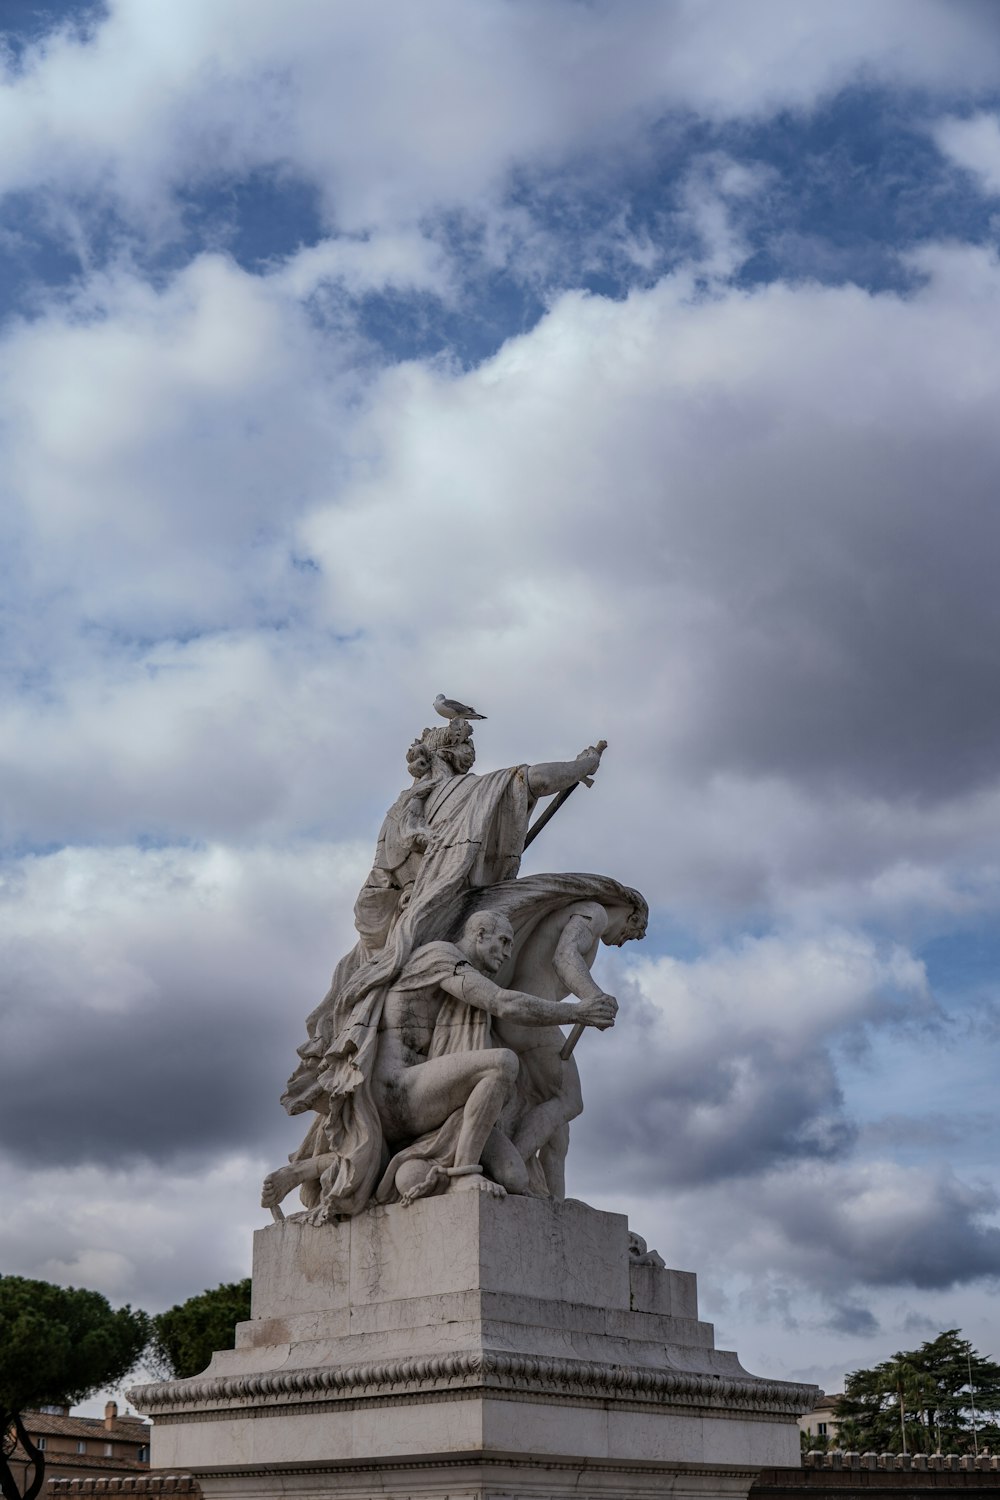 a statue of a man riding a horse in front of a cloudy sky